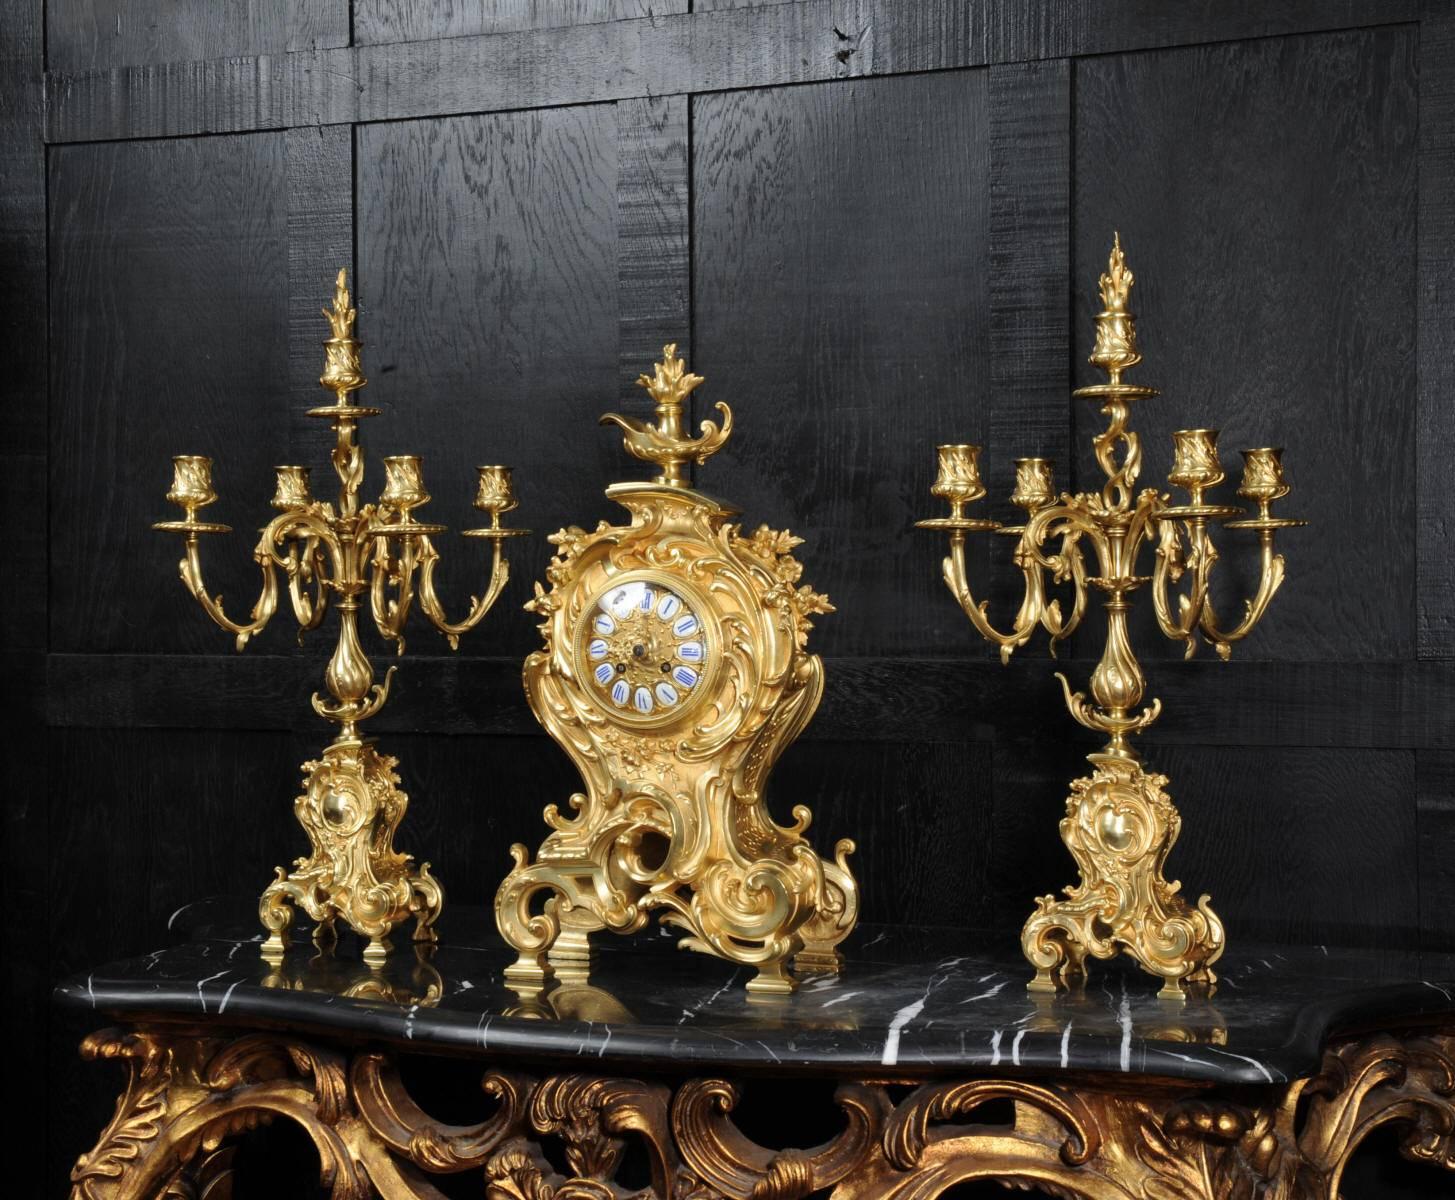 A large and stunning antique French gilt bronze clock set by Japy Freres, fully overhauled and working. It is Rococo in style, a bold, asymmetric balloon shape profusely decorated with acanthus and floral swags. To the top is a flaming finial, the